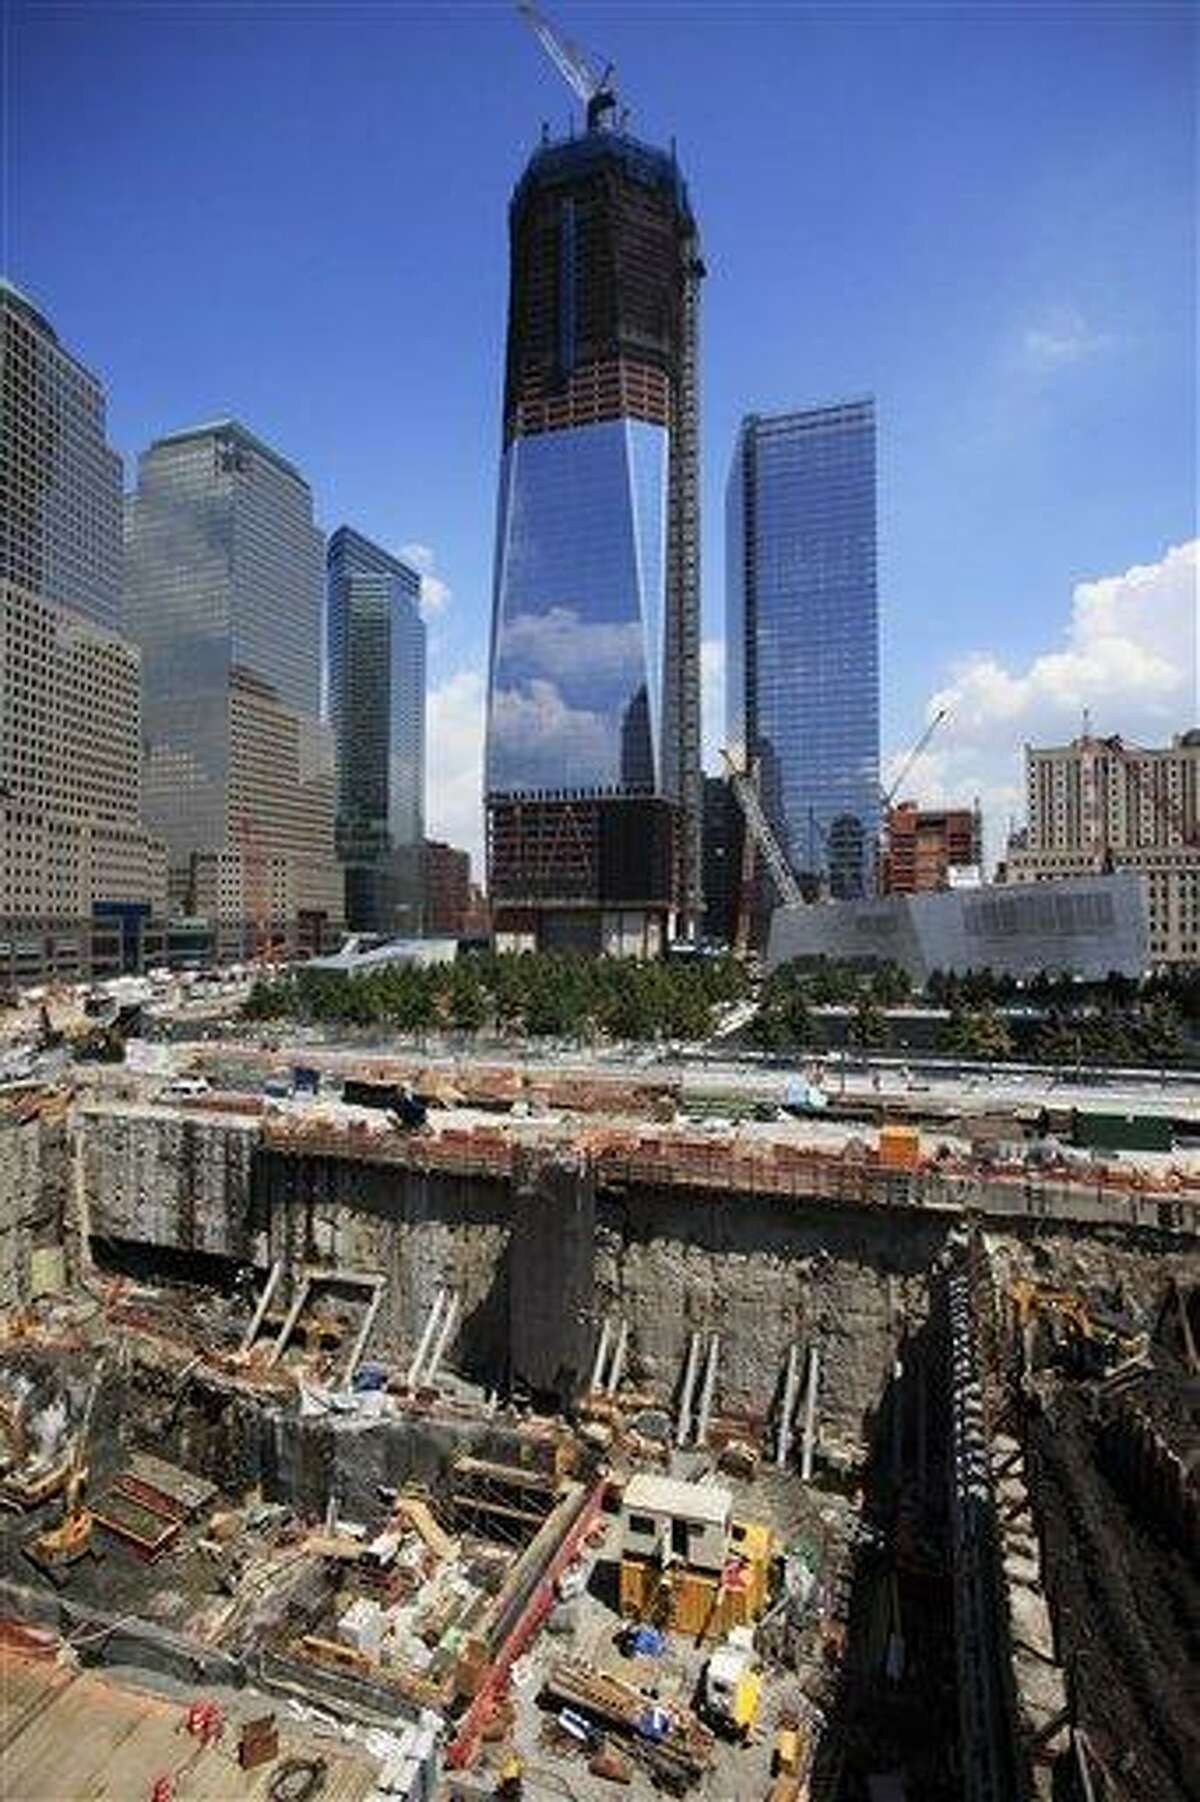 Construction continues on One World Trade Center, top center, and the Vehicle Security Center, lower left, Friday, August 5, 2011 in New York. The tower has reached the 76th floor on the way to 104 floors. (AP Photo/Mark Lennihan)